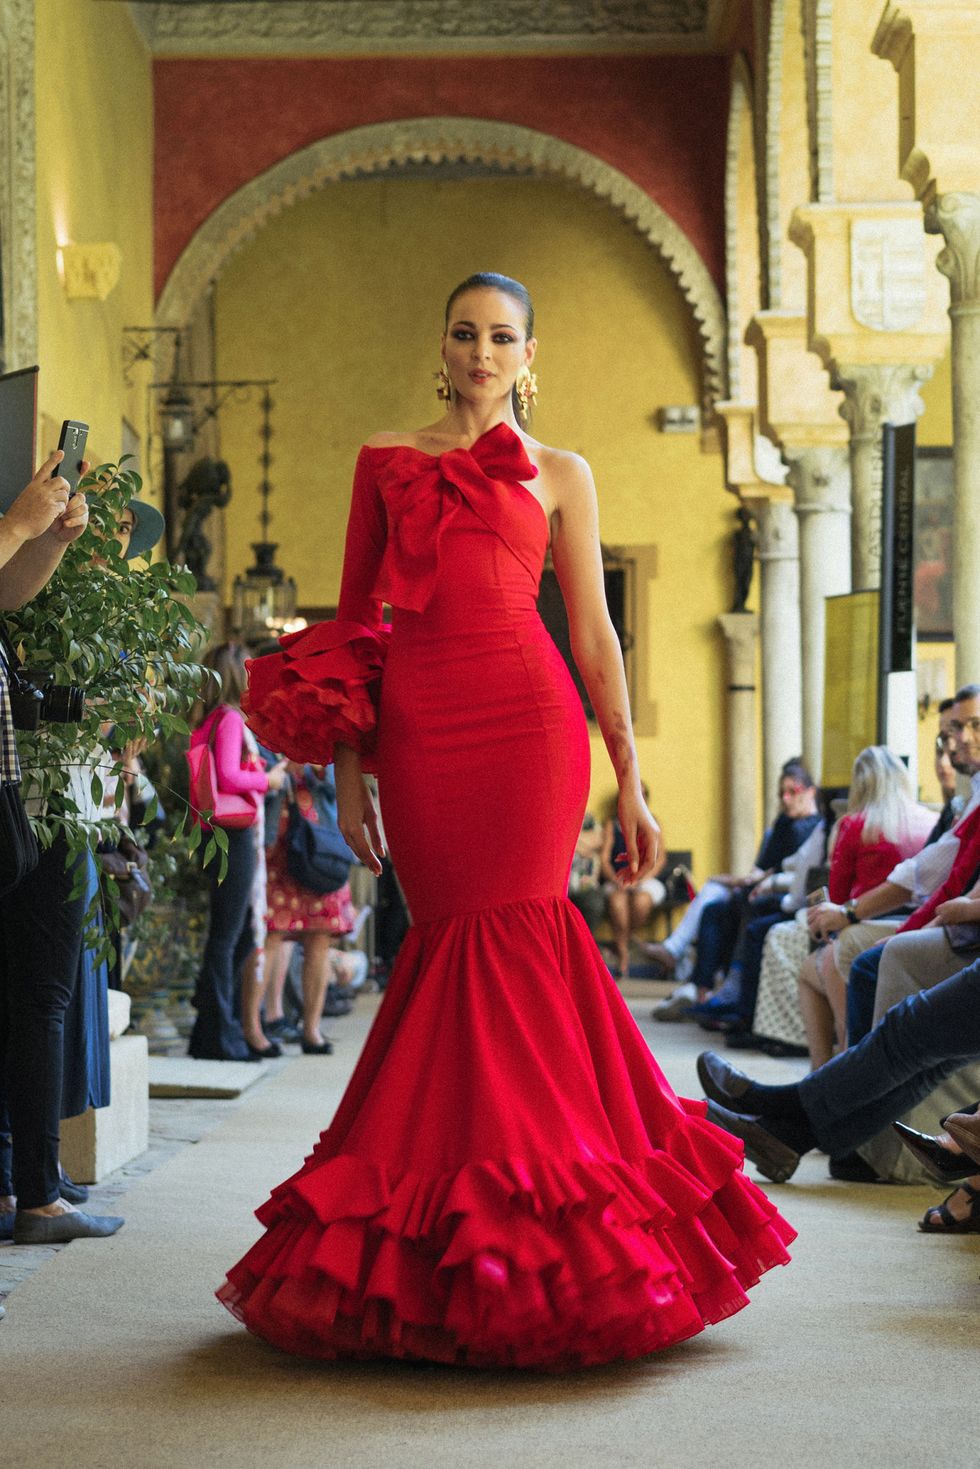 Fashion model, Gown, Dress, Clothing, Shoulder, Fashion, Haute couture, Red, Formal wear, Beauty, 